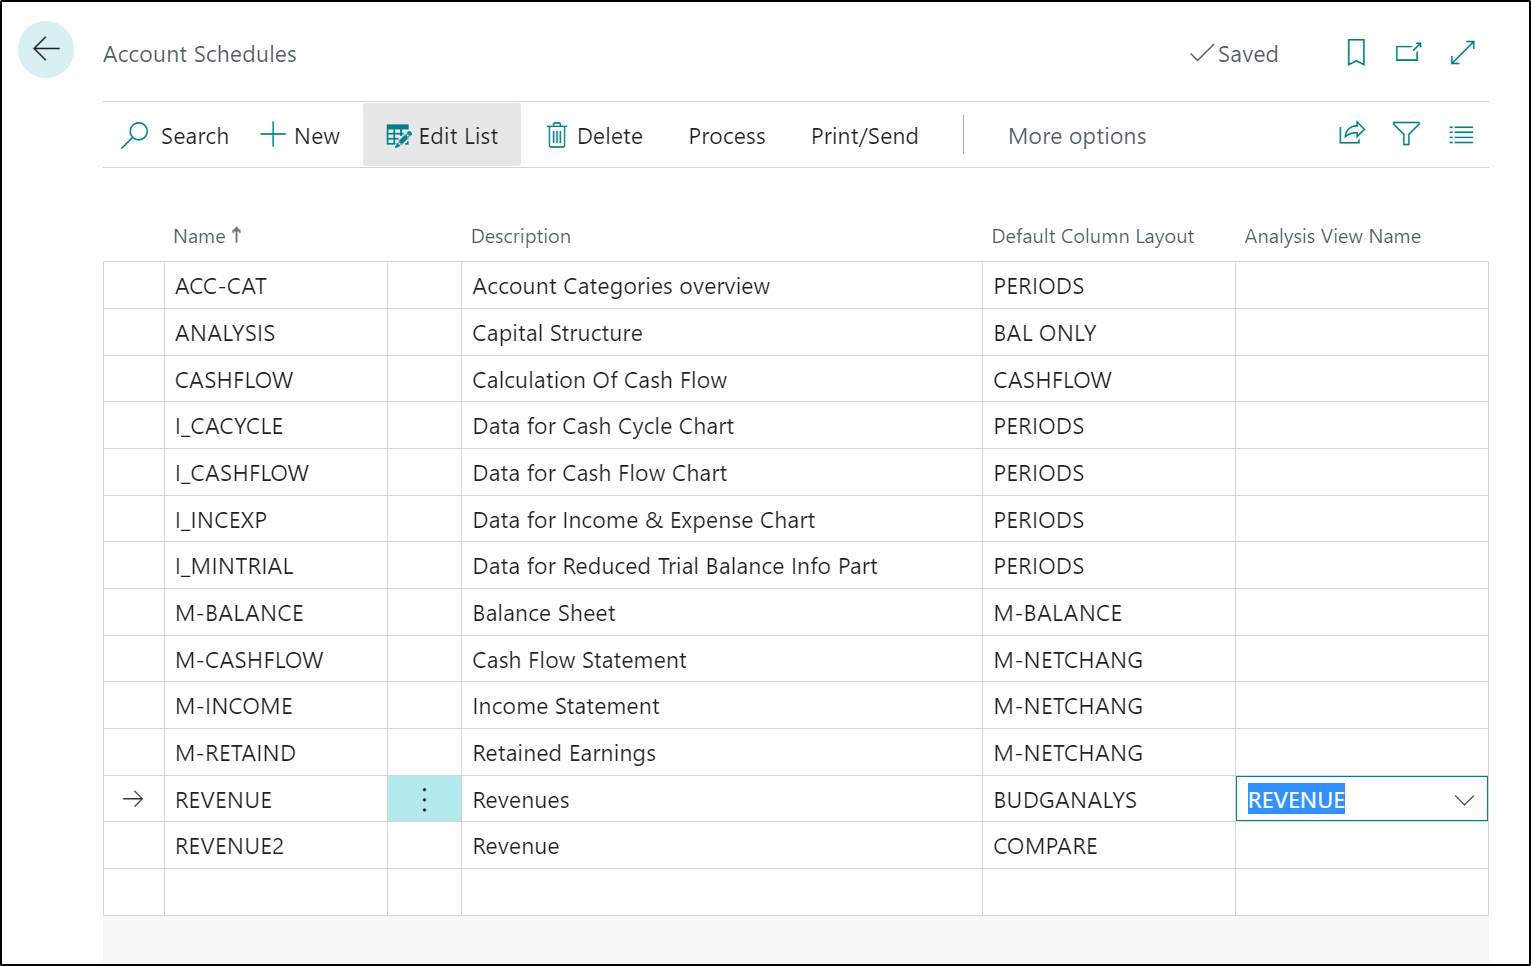 Screenshot of the Account schedules with analysis view name field.